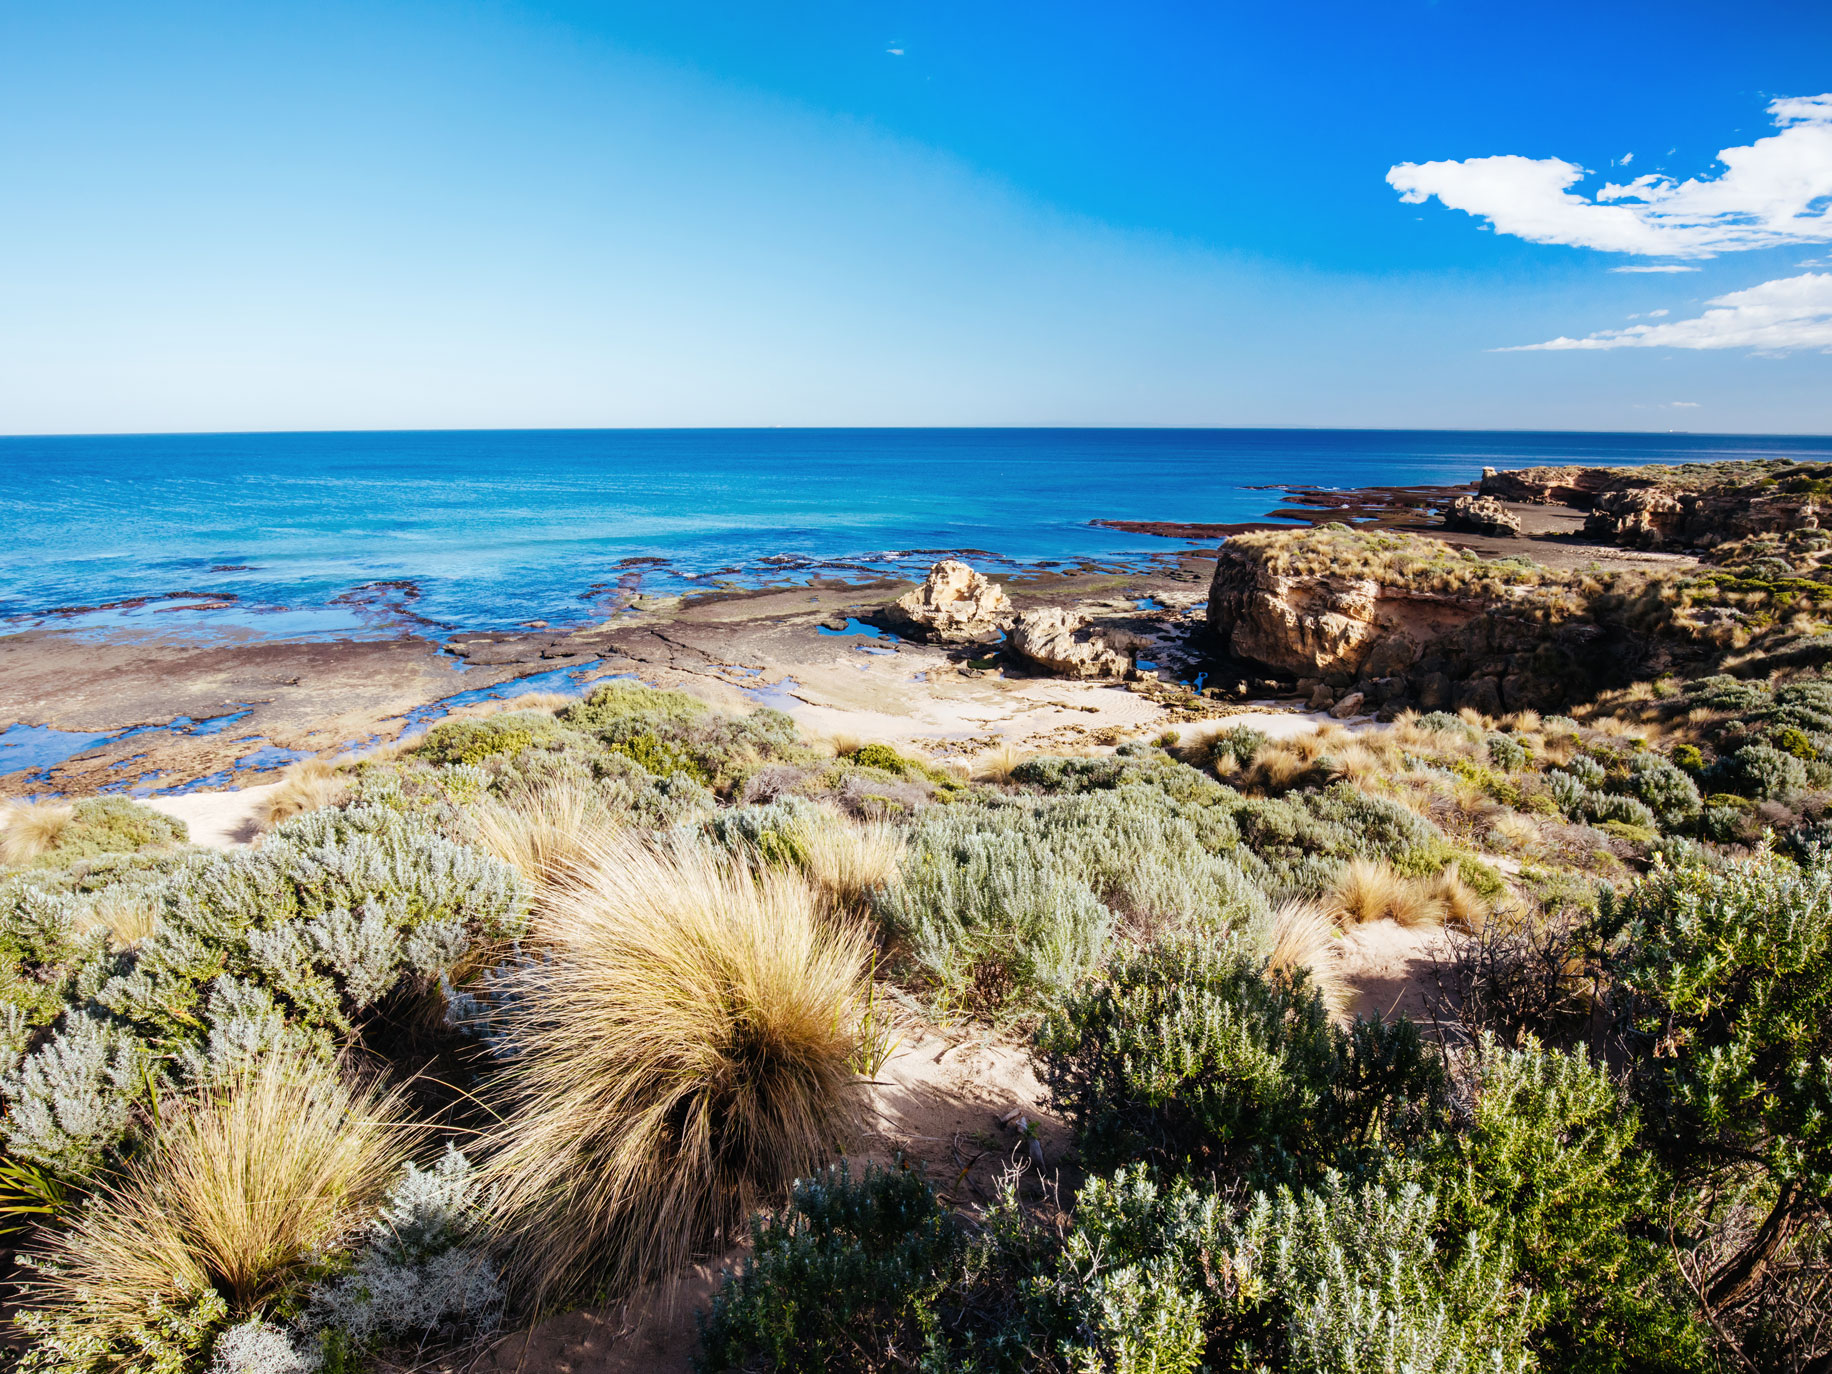 Blairgowrie marks the point along the Mornington Peninsula at which camping grounds become markedly fewer and smaller, leaving the bulk of the foreshore and bay beach easily accessible.